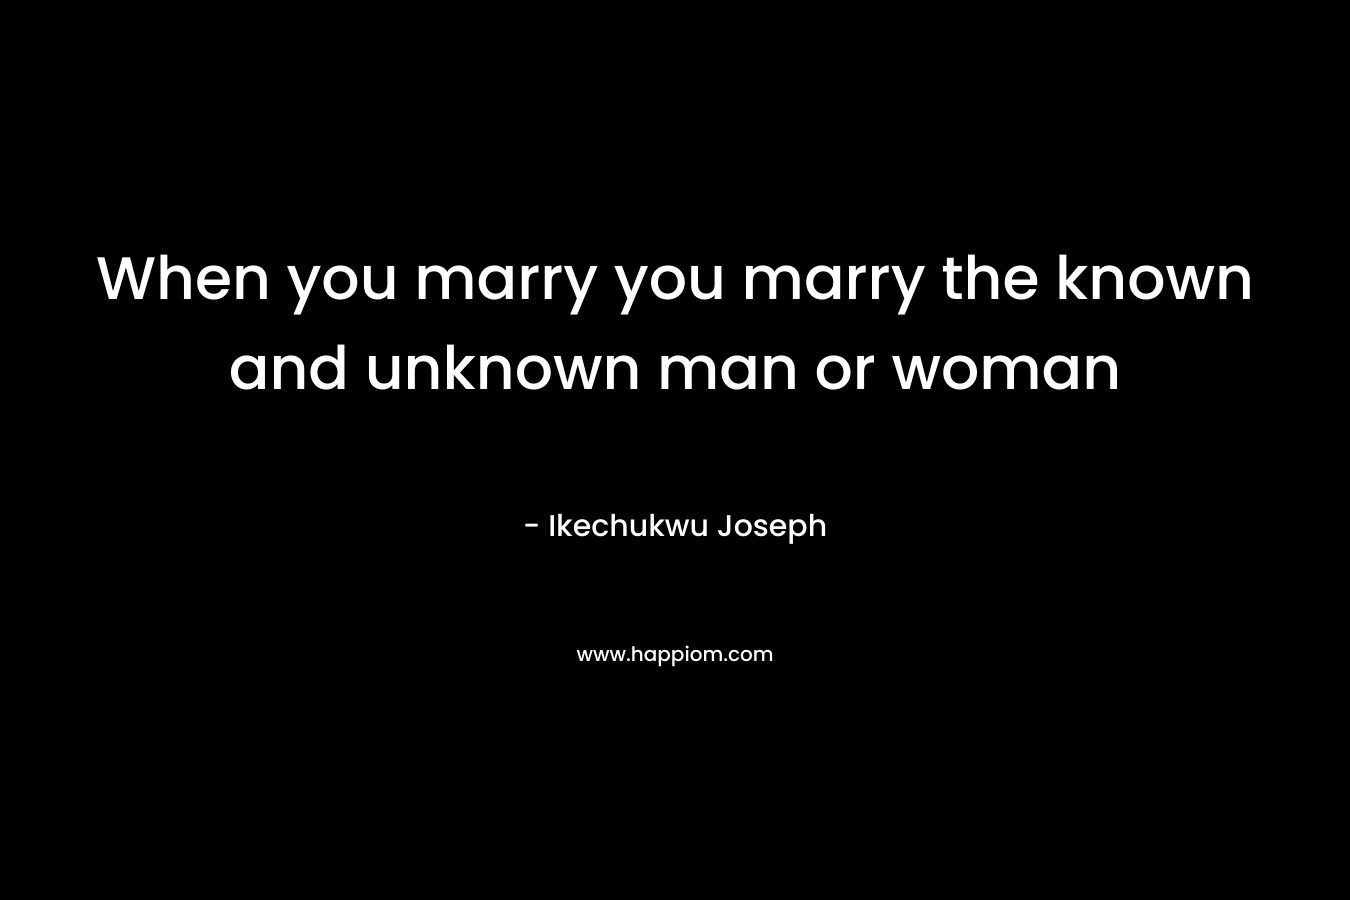 When you marry you marry the known and unknown man or woman